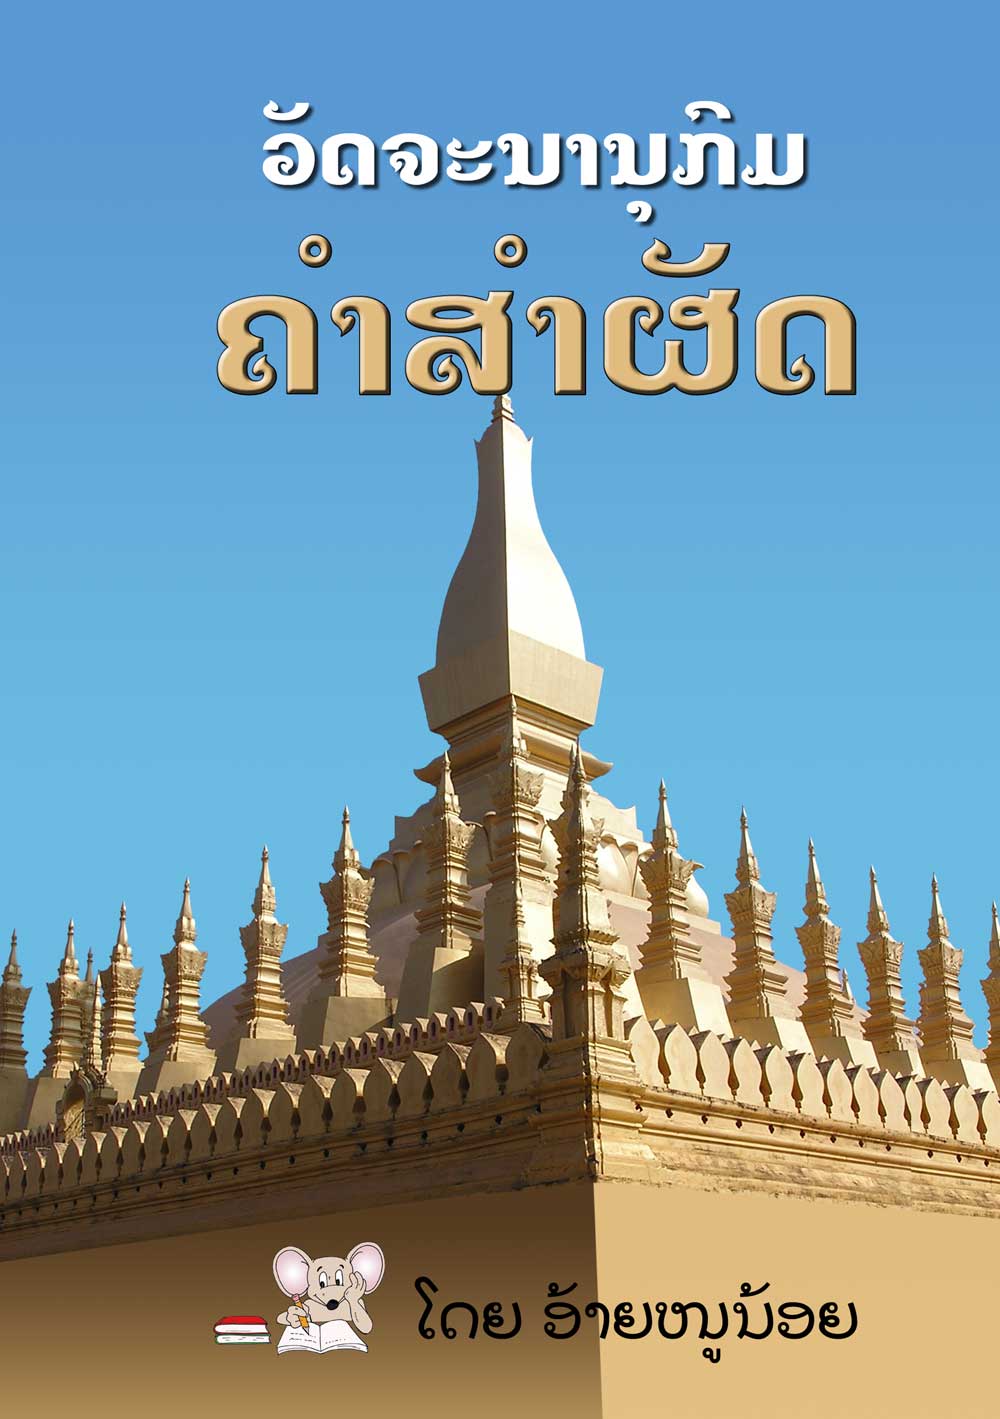 Rhyming Dictionary large book cover, published in Lao language